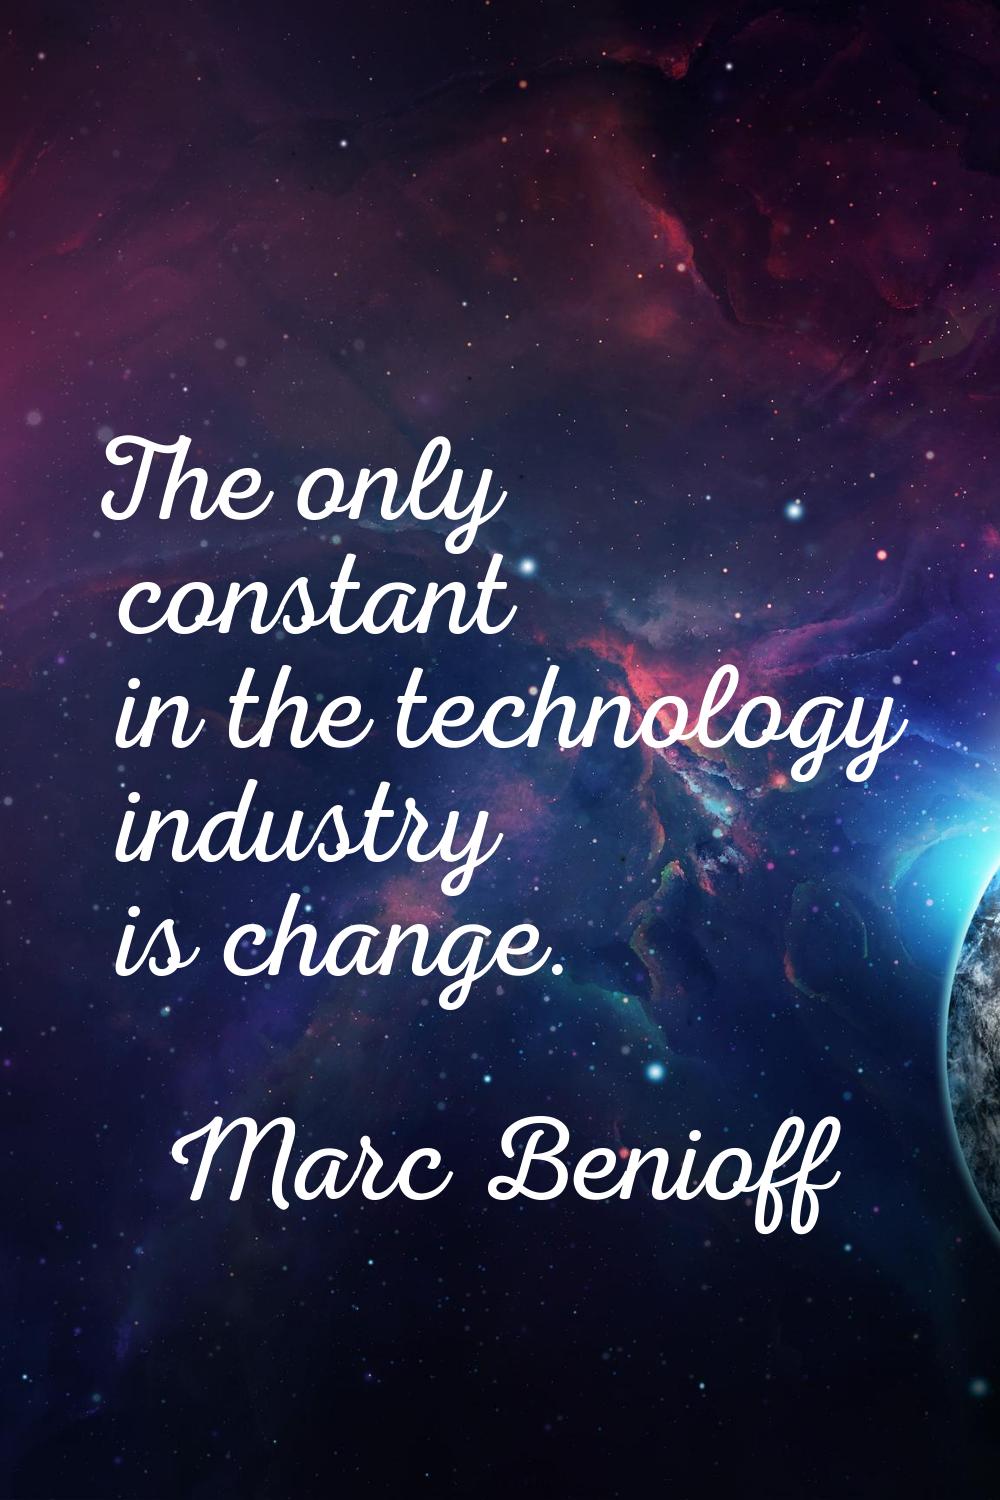 The only constant in the technology industry is change.